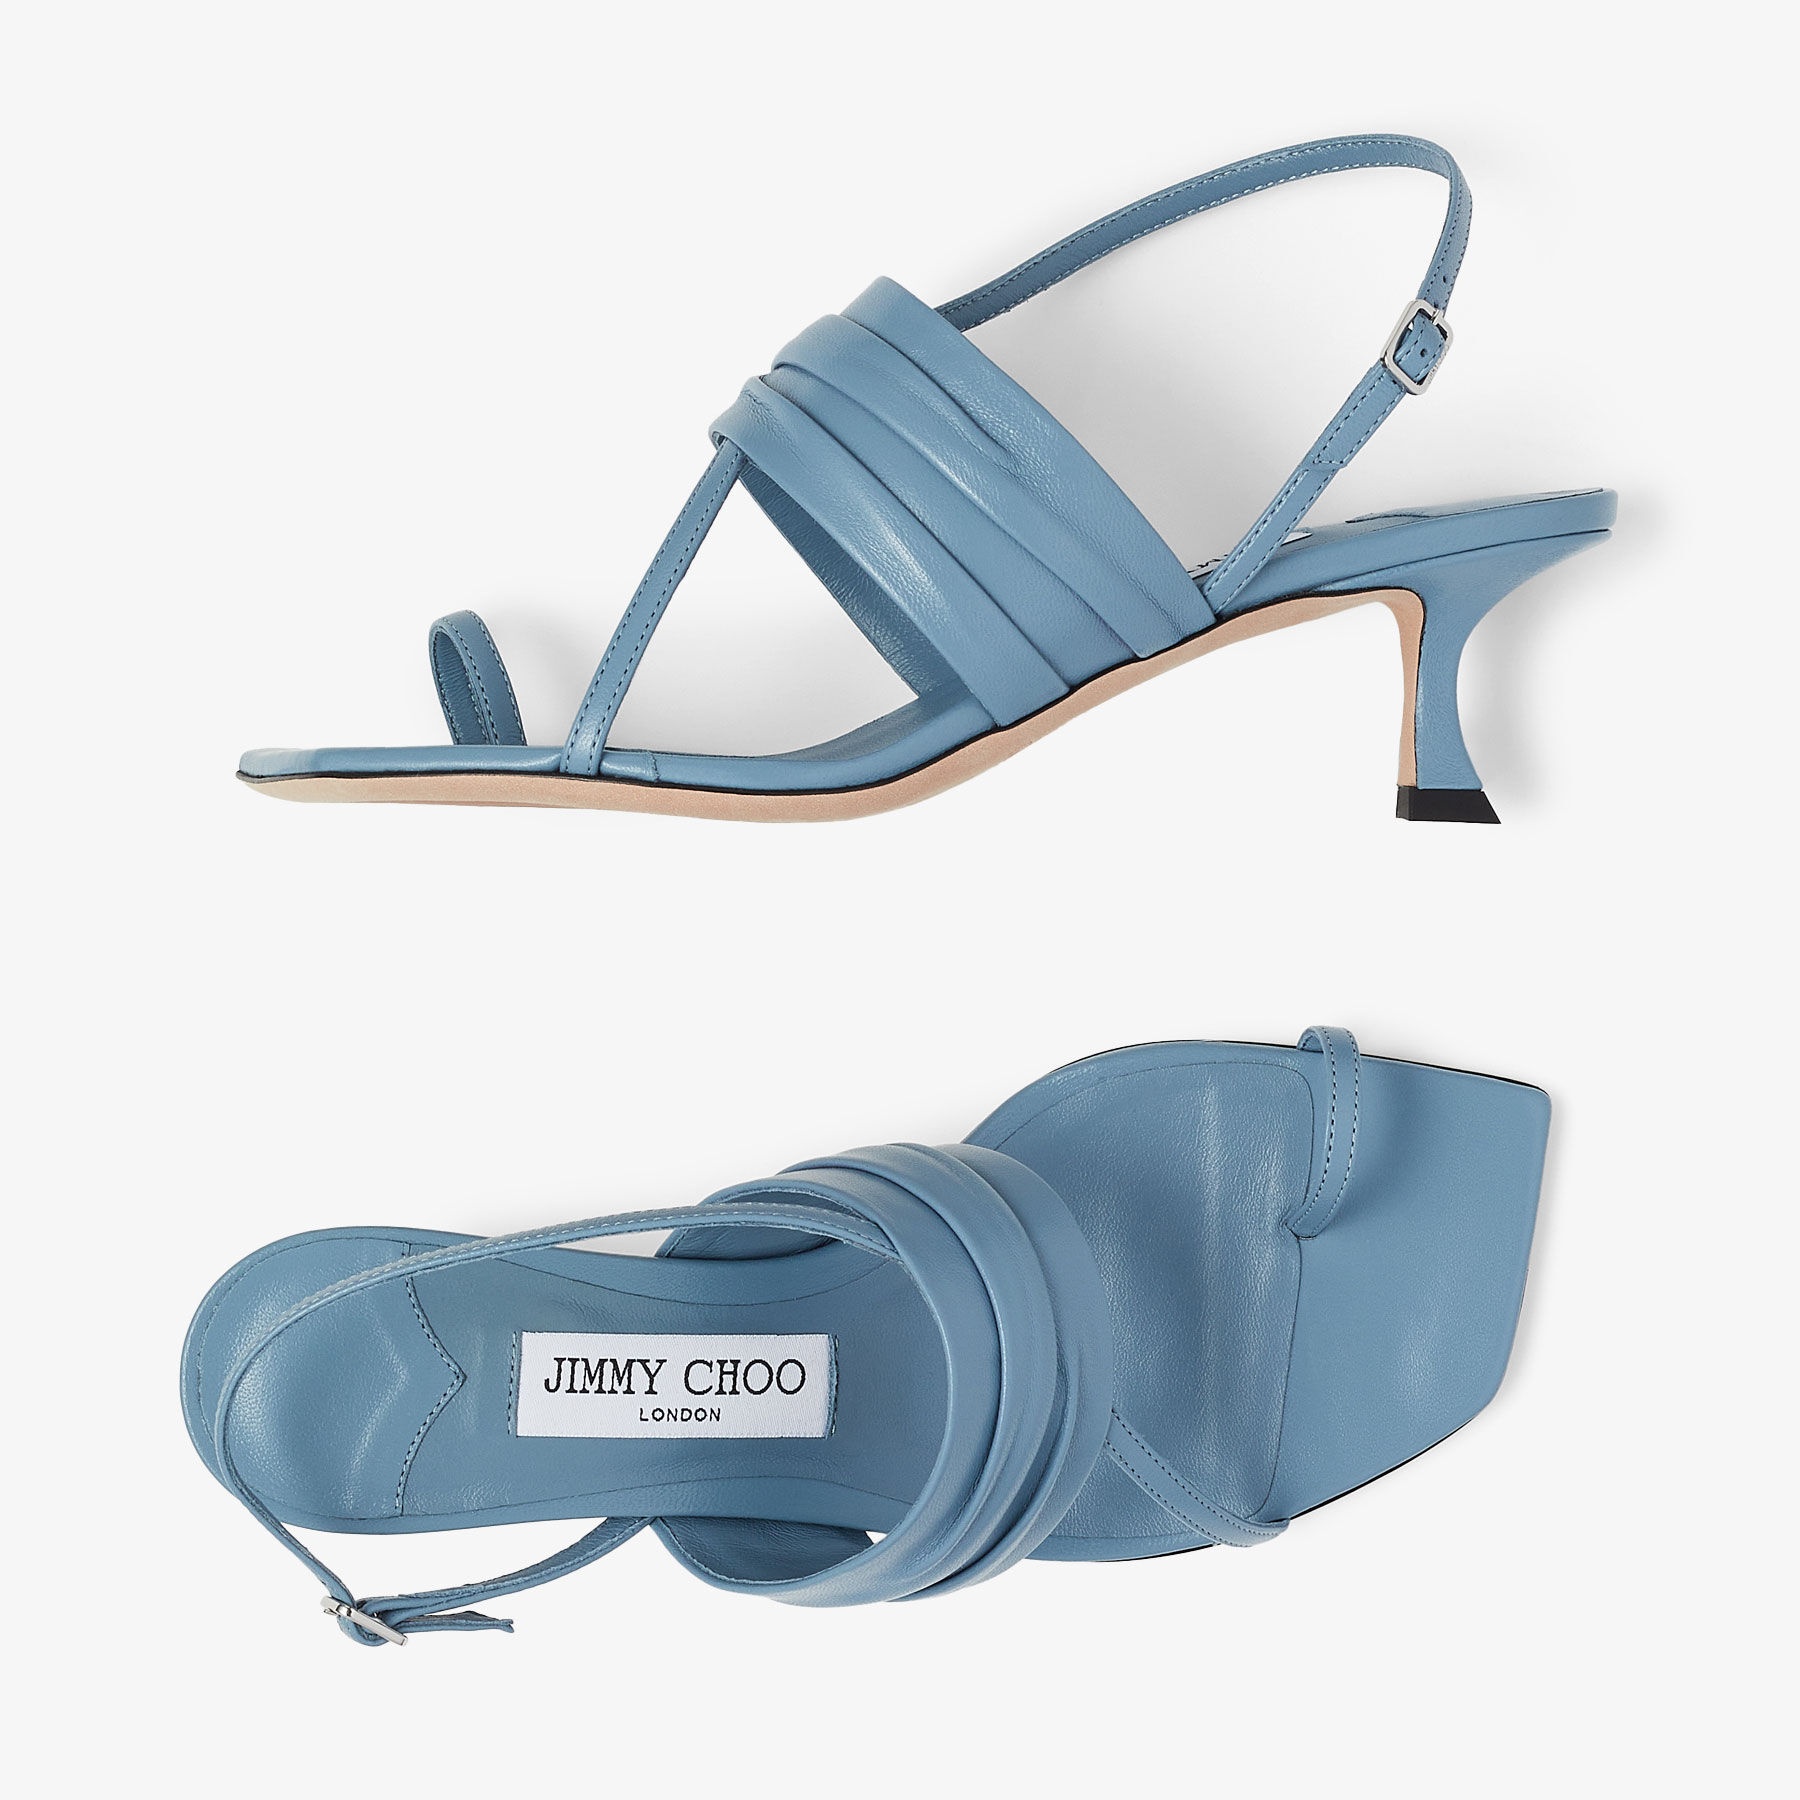 Beziers 50
Smoky Blue Nappa Leather Sandals - 5